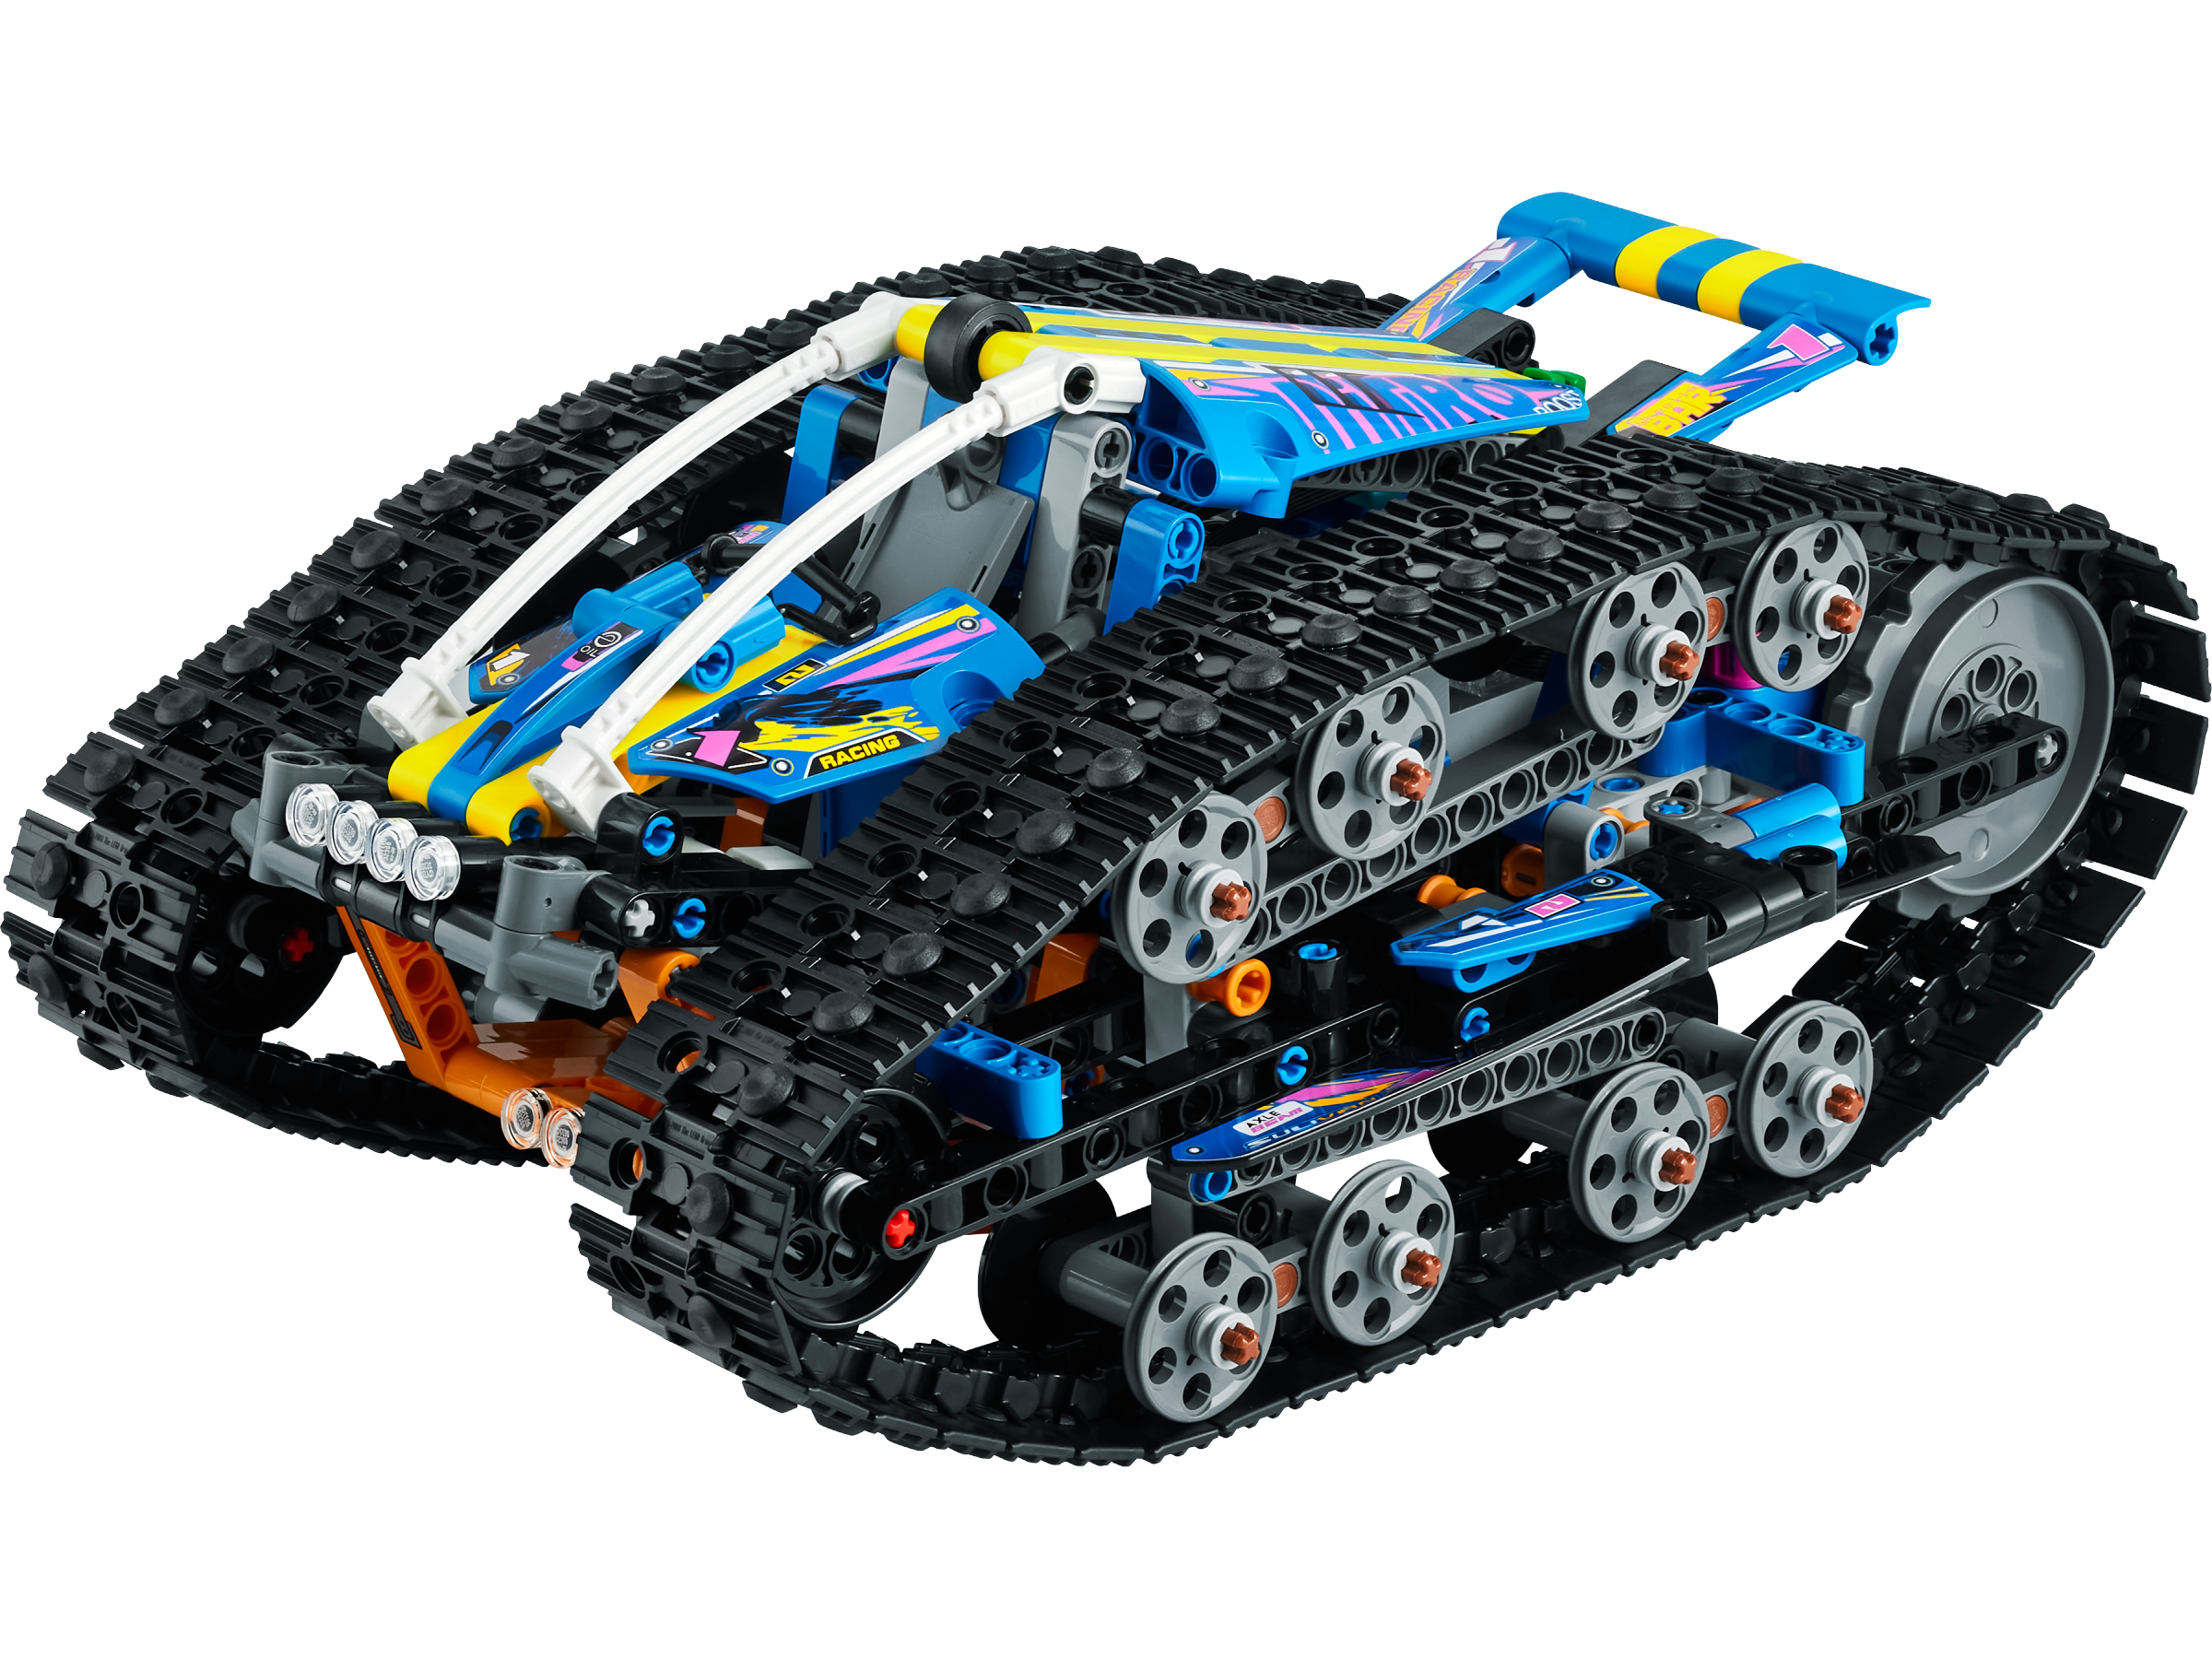 Vaardigheid onderpand Tulpen App-Controlled Transformation Vehicle 42140 | Technic™ | Buy online at the  Official LEGO® Shop US